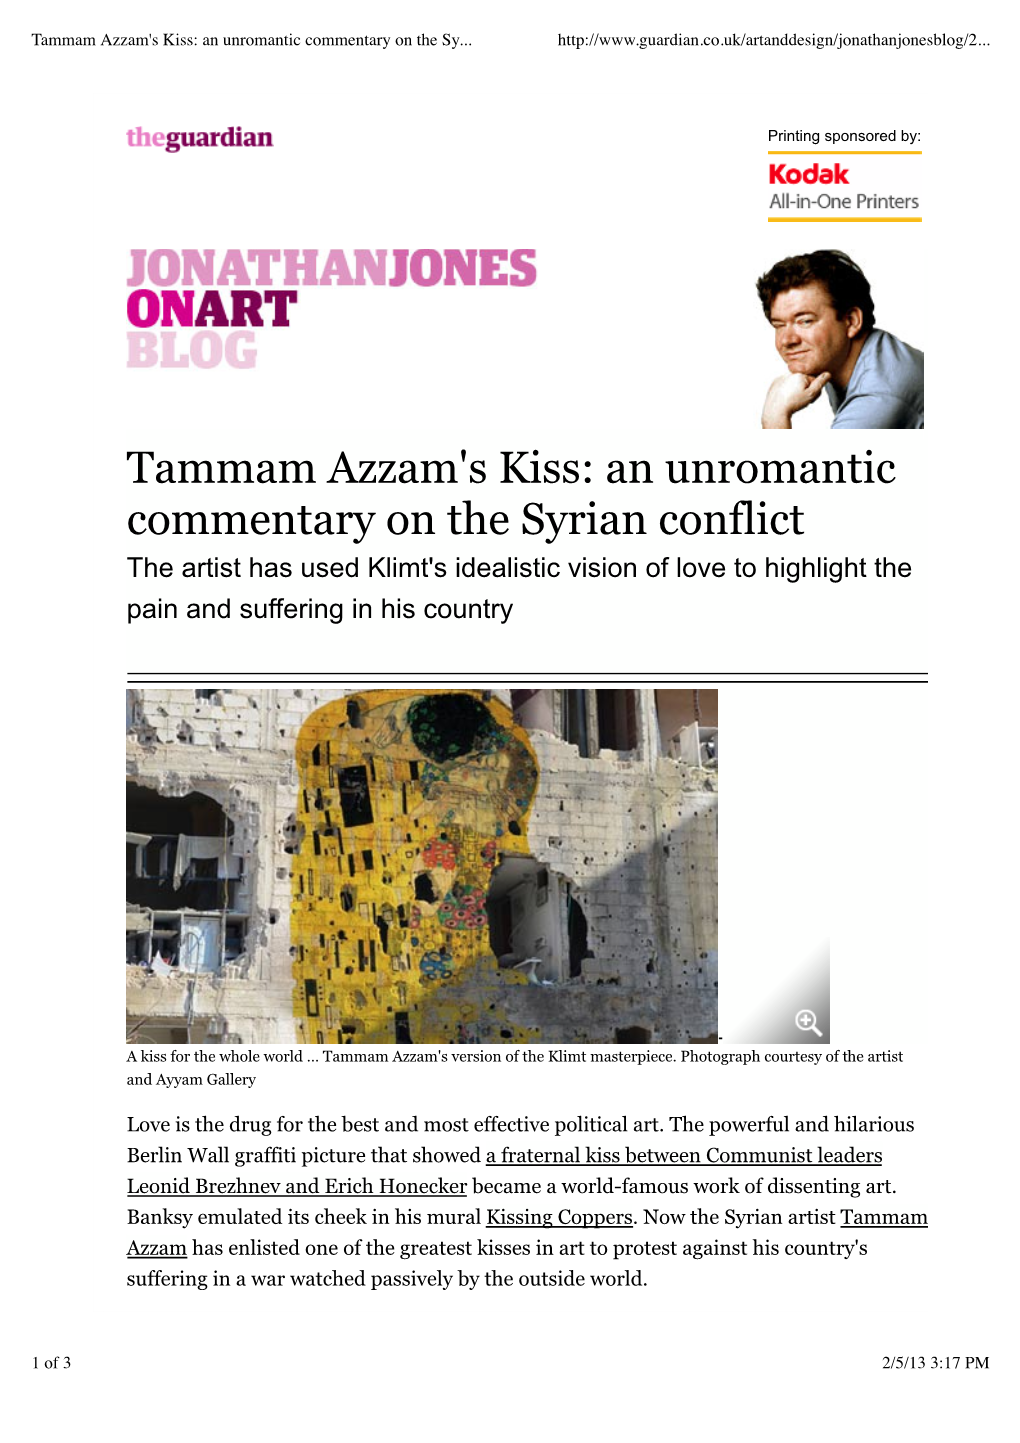 Tammam Azzam's Kiss an Unromantic Commentary on the Syrian Conflict | Art and Design | the Guardian